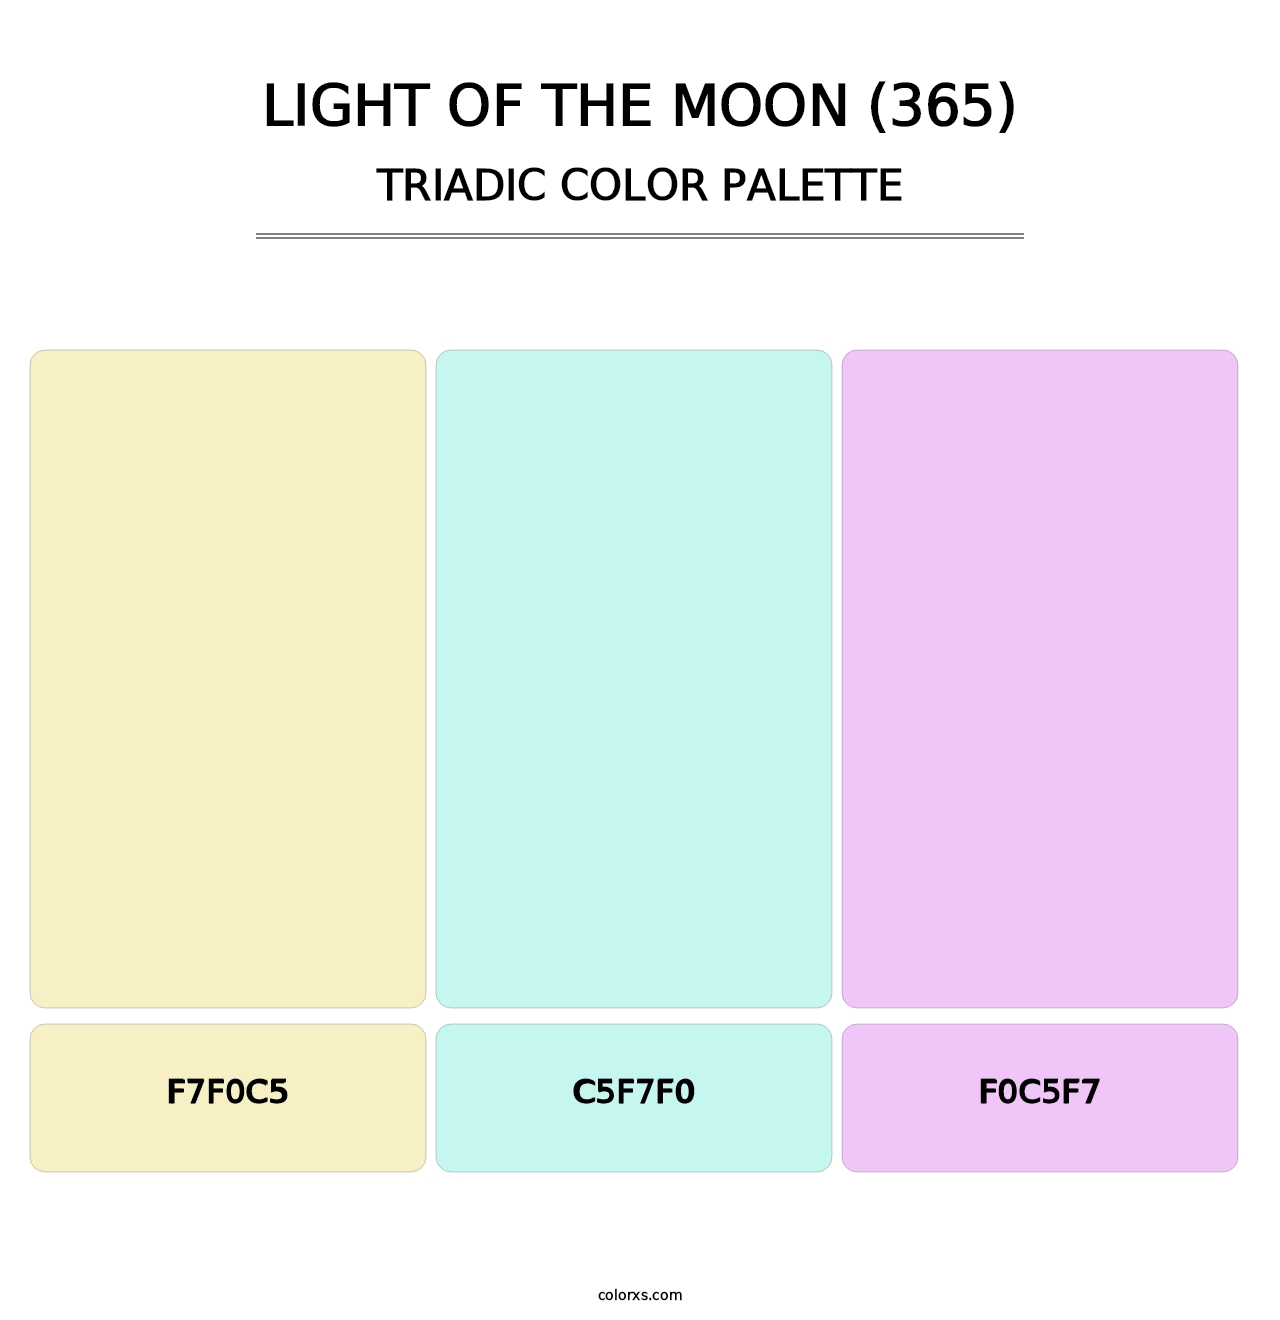 Light of the Moon (365) - Triadic Color Palette